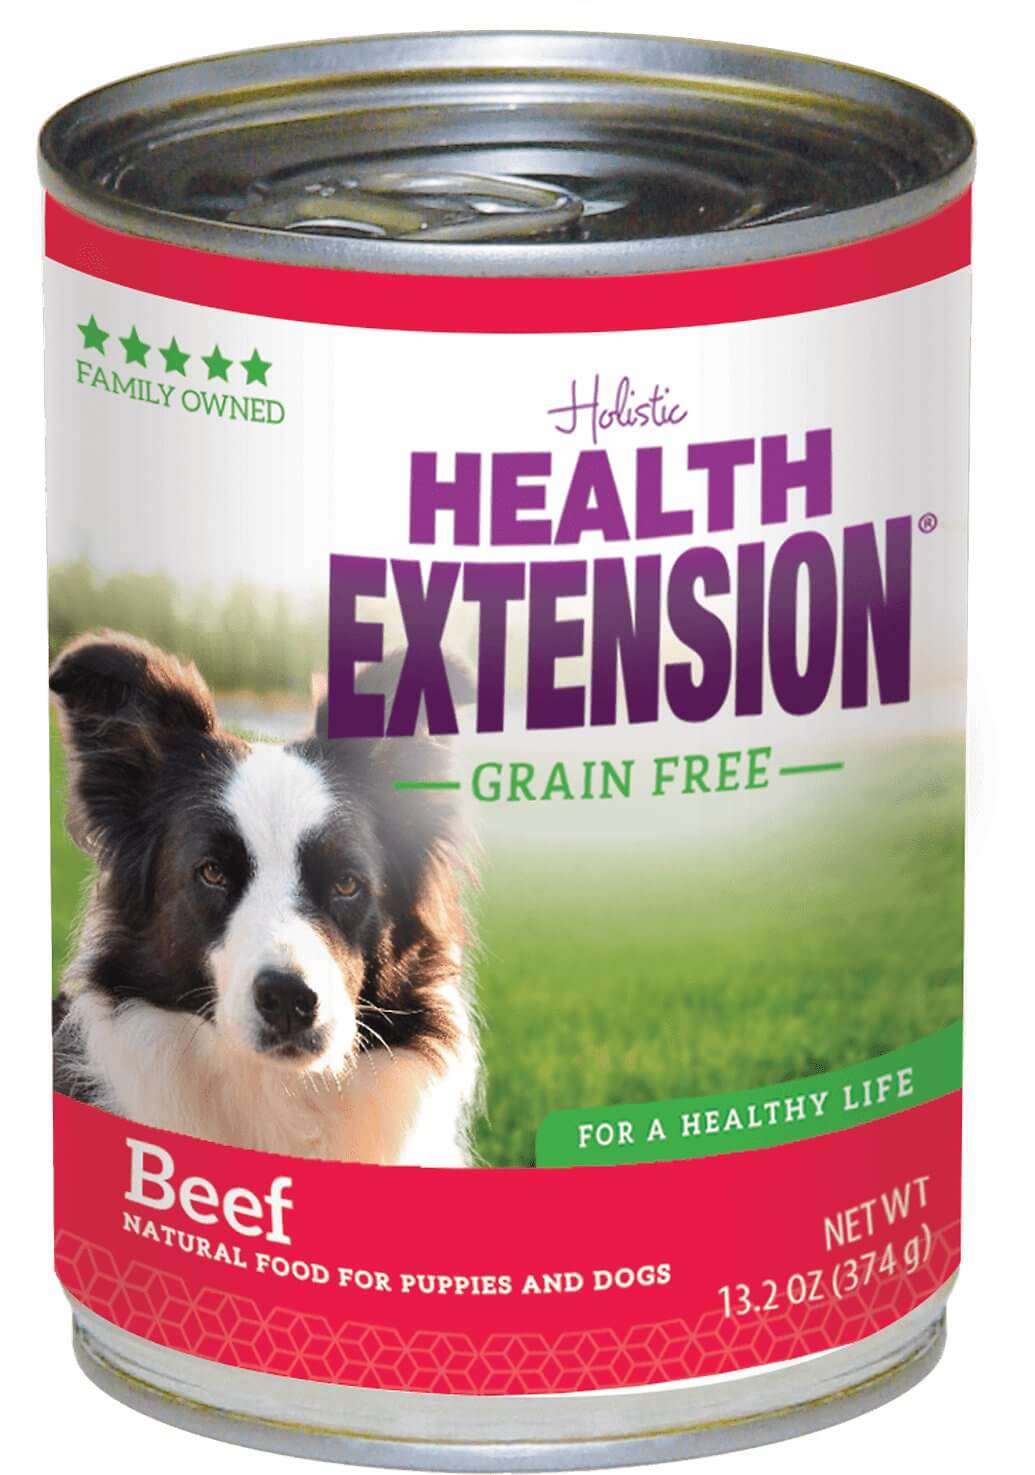 Health Extension Dog Food Review (Canned)